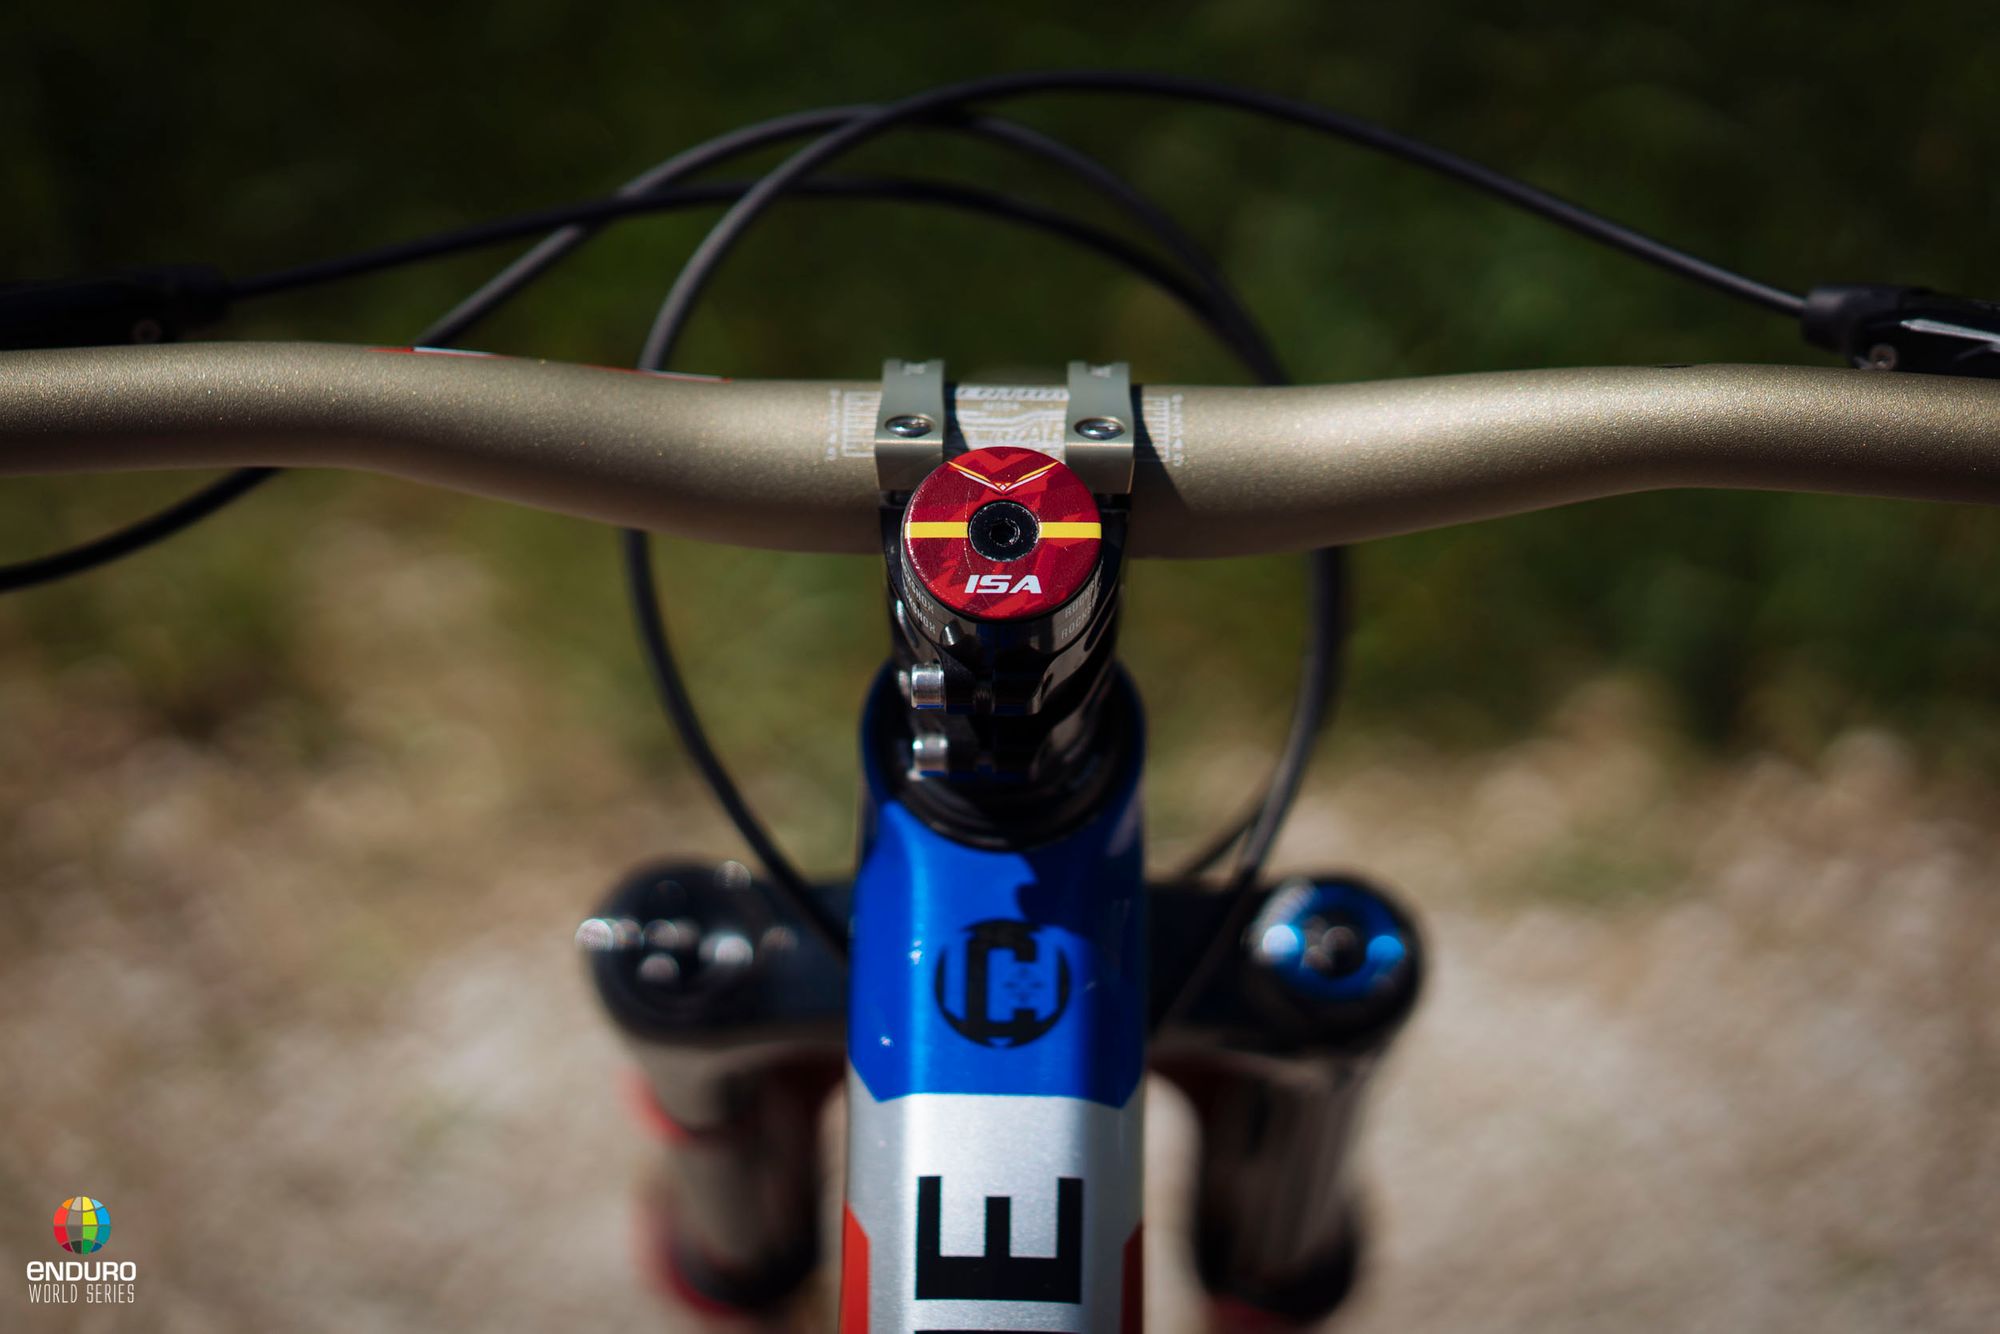 What handle bar widths do the top EWS Enduro and World Cup Downhill riders use?